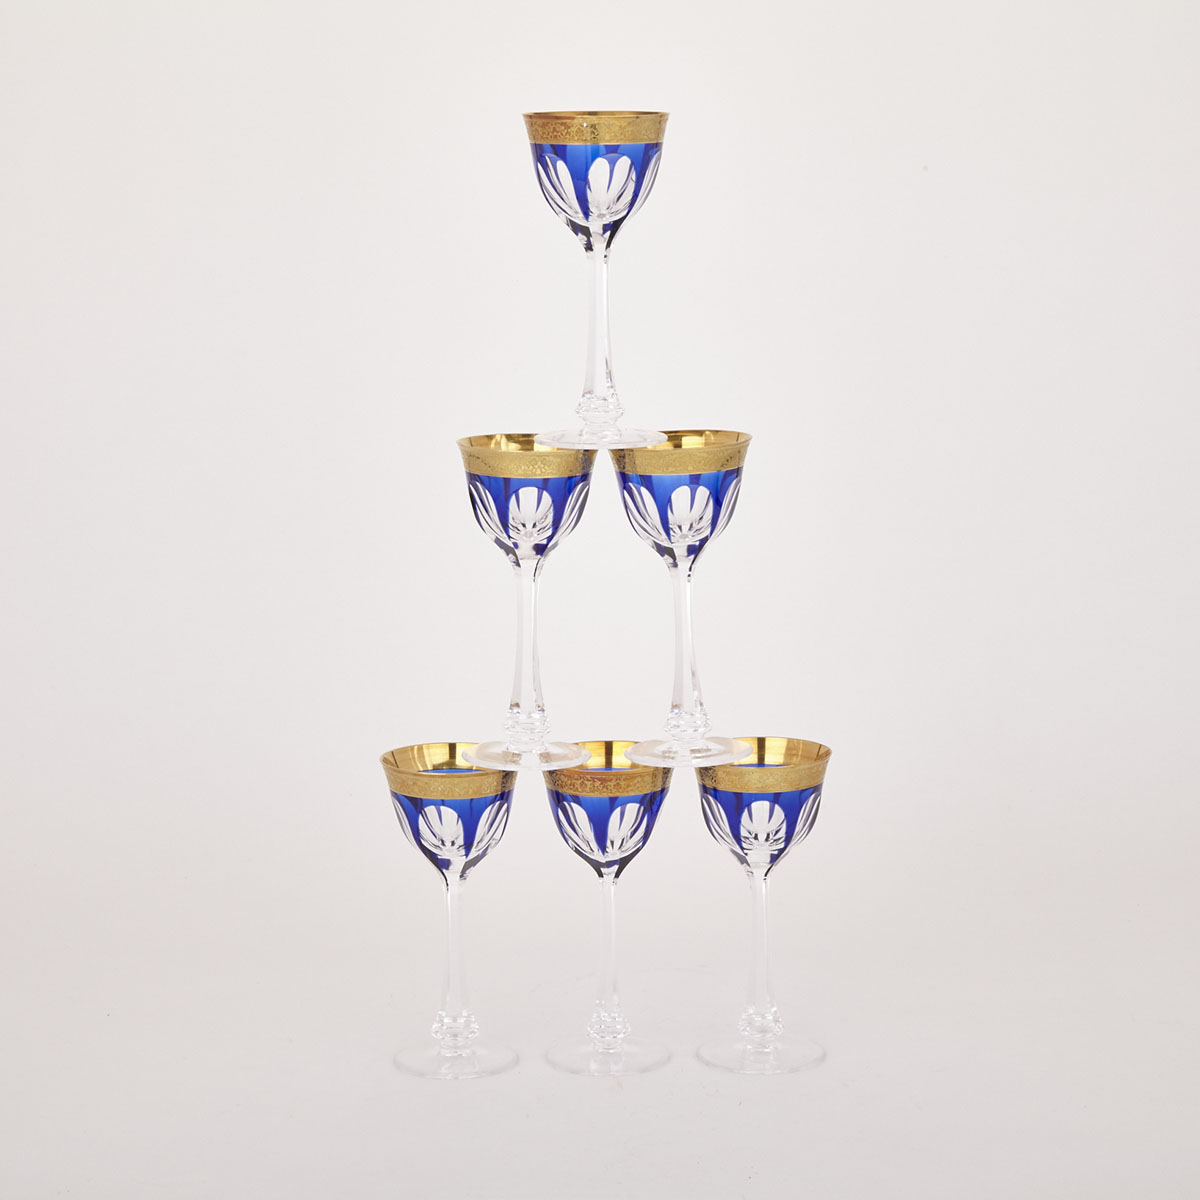 Six Moser Blue Overlaid, Cut, Etched and Gilt Glass Wine Goblets, 20th century